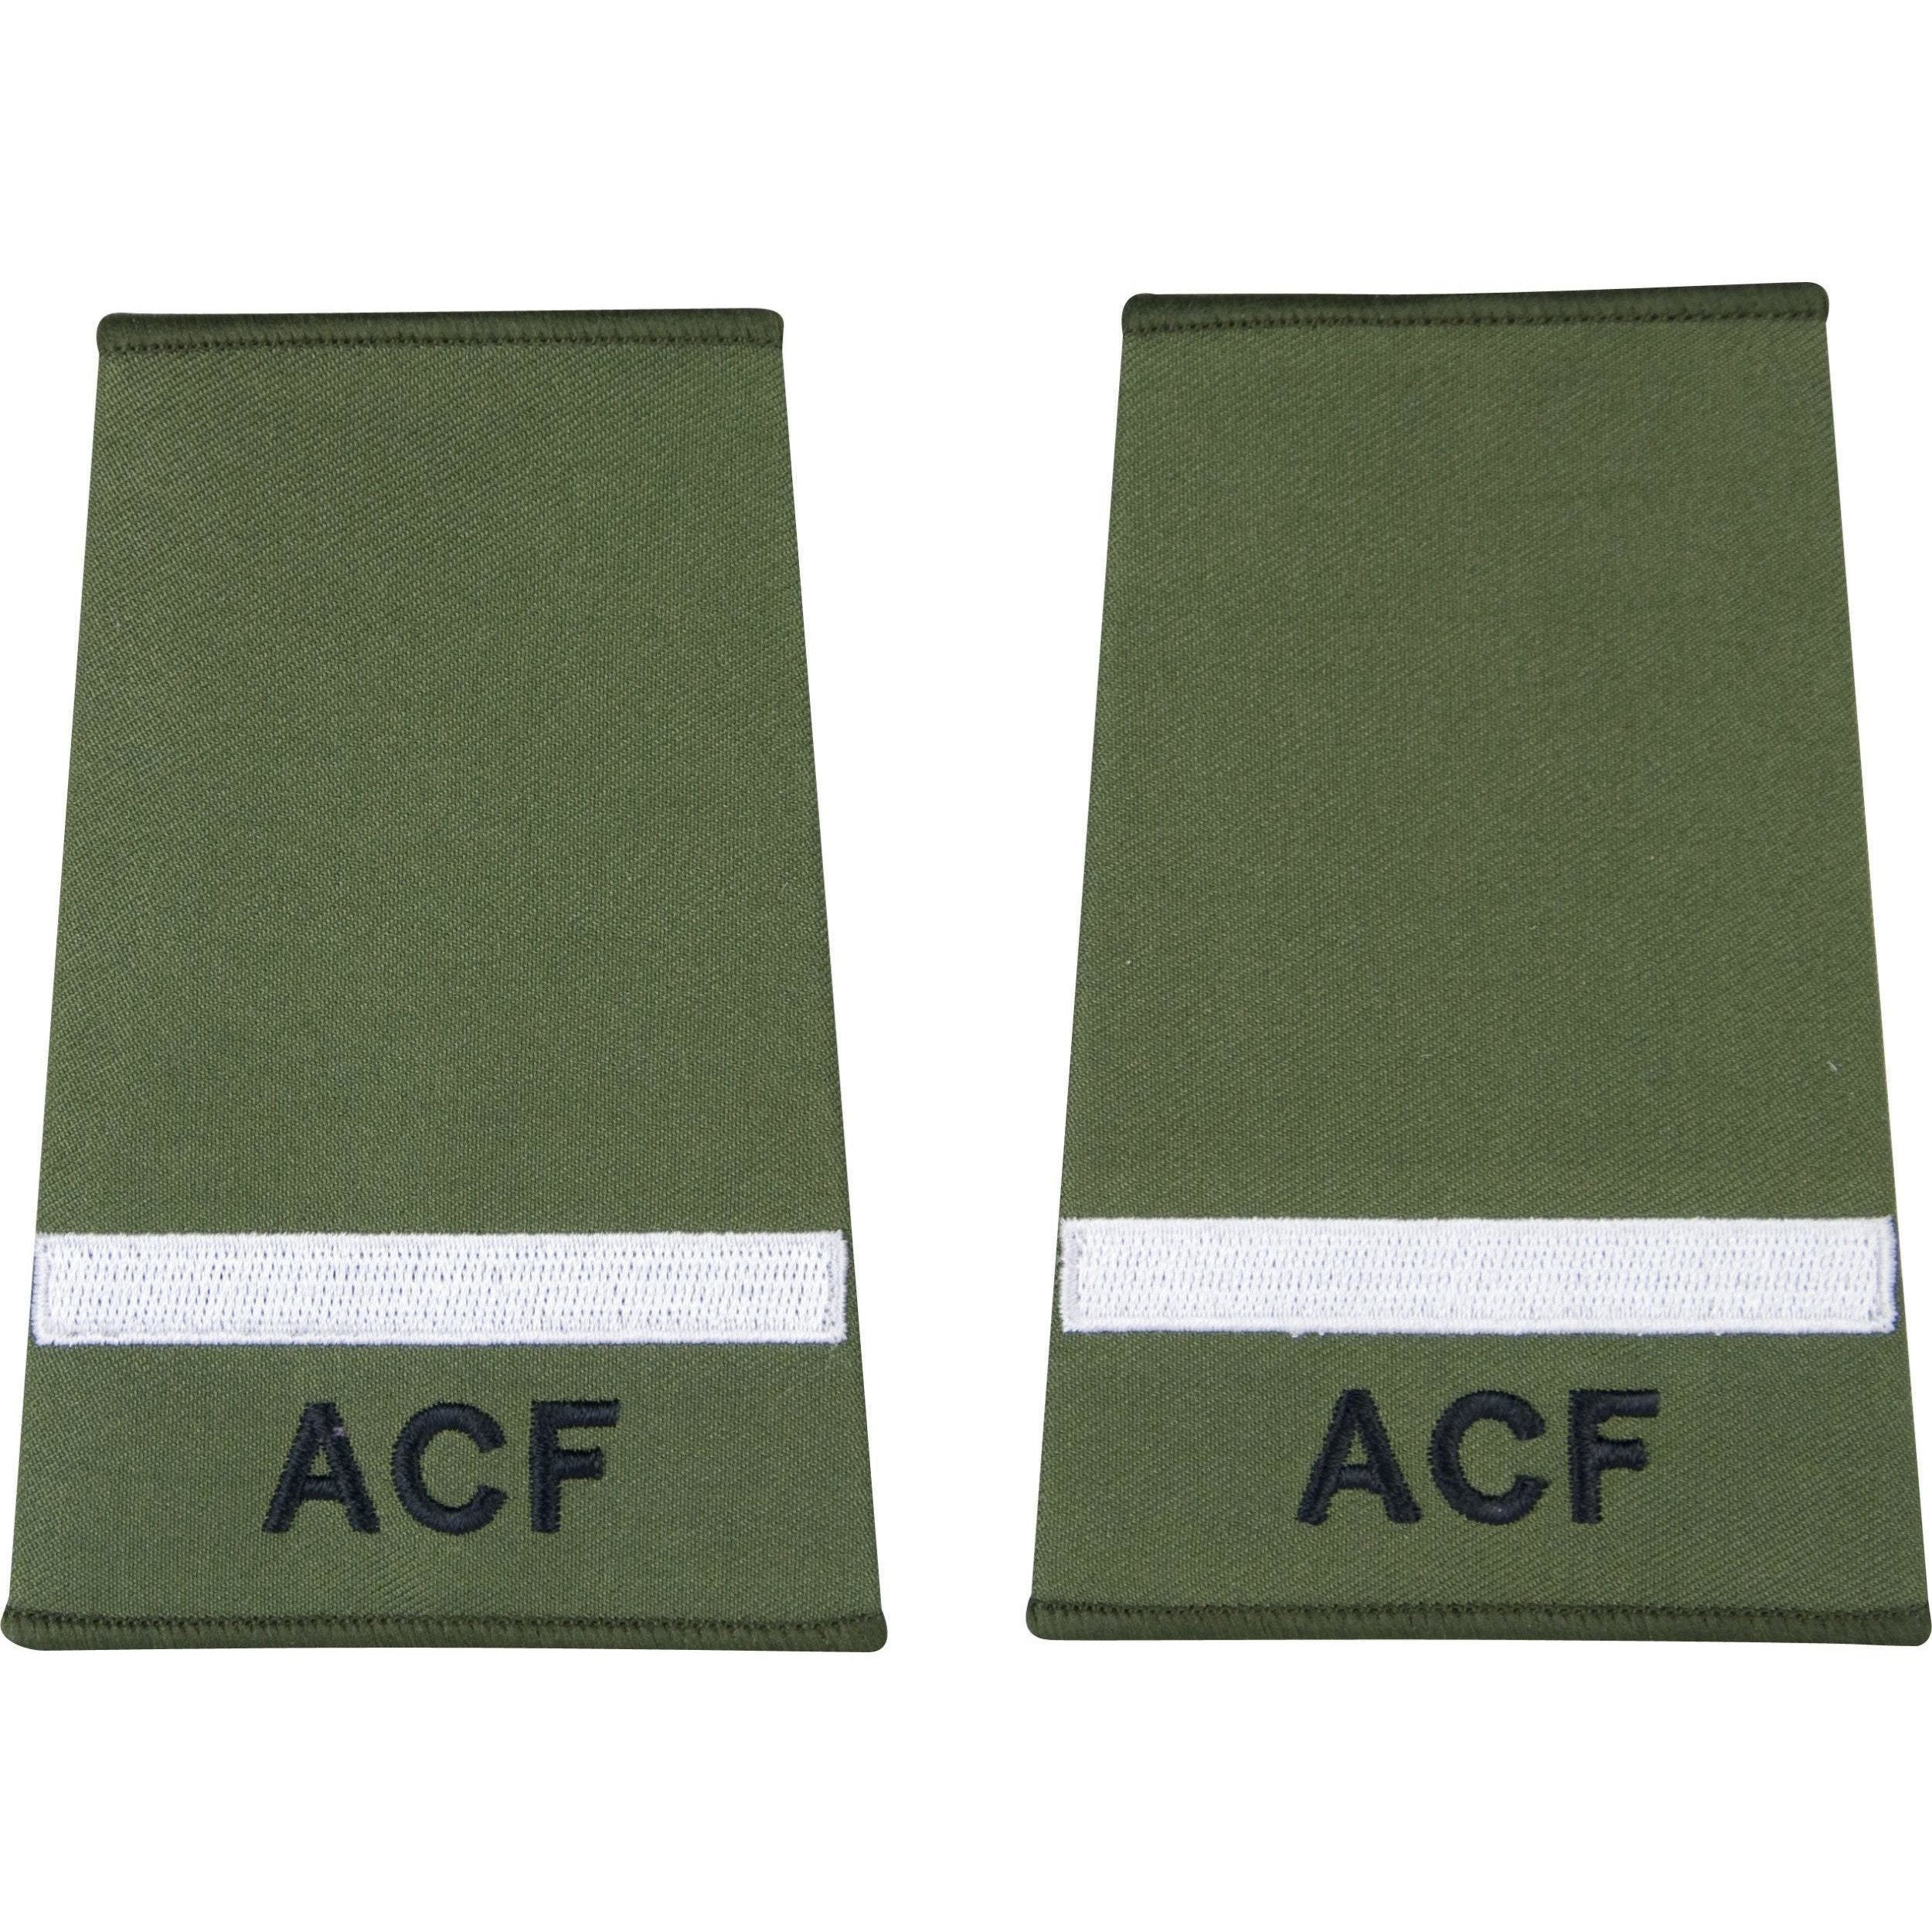 ACF Under Officer | Ammo & Company | Embroidered Badges